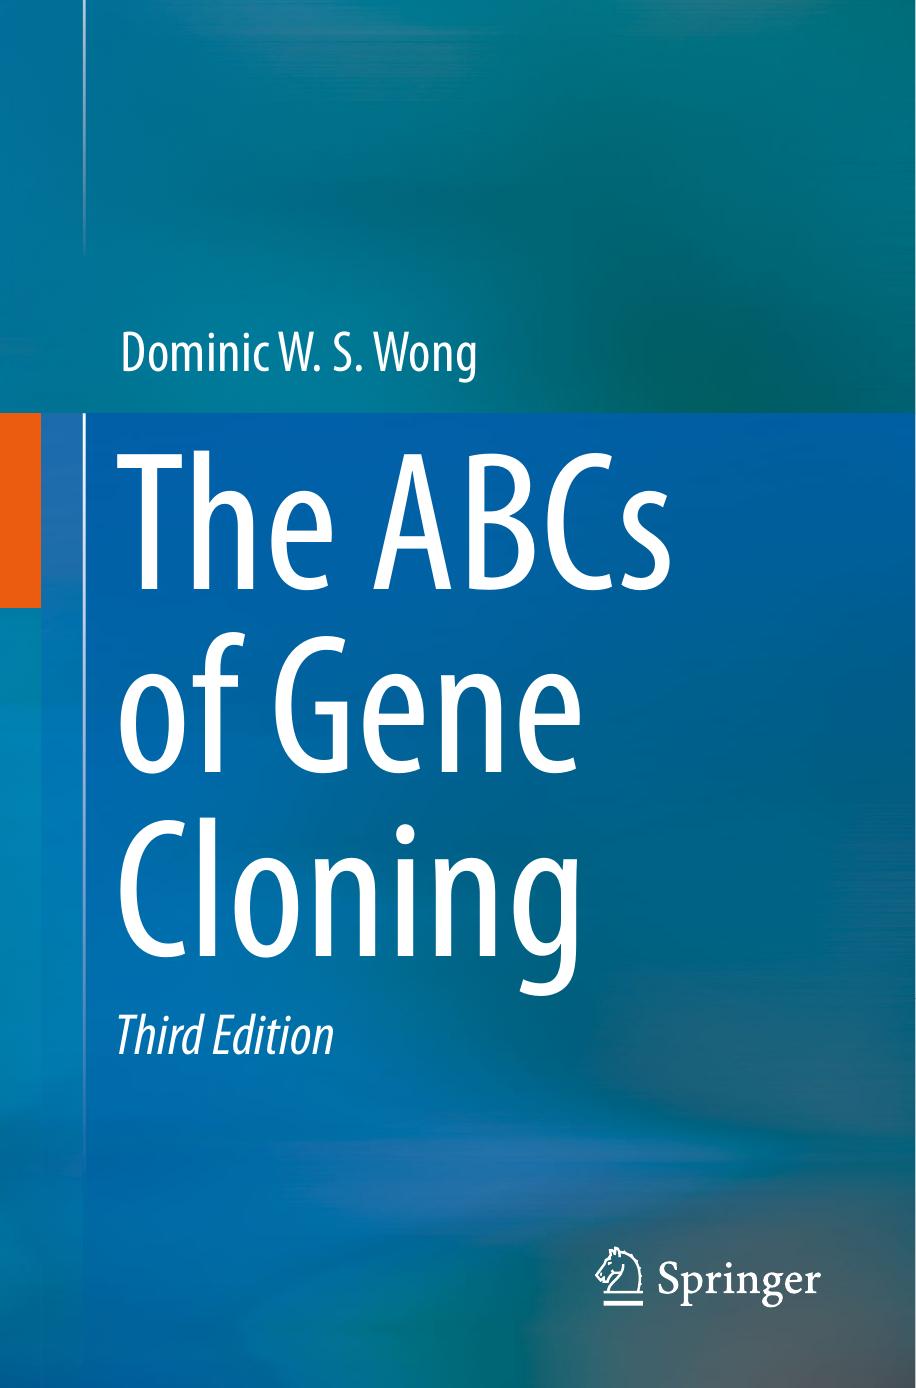 The ABCs of Gene Cloning by Dominic W. S. Wong